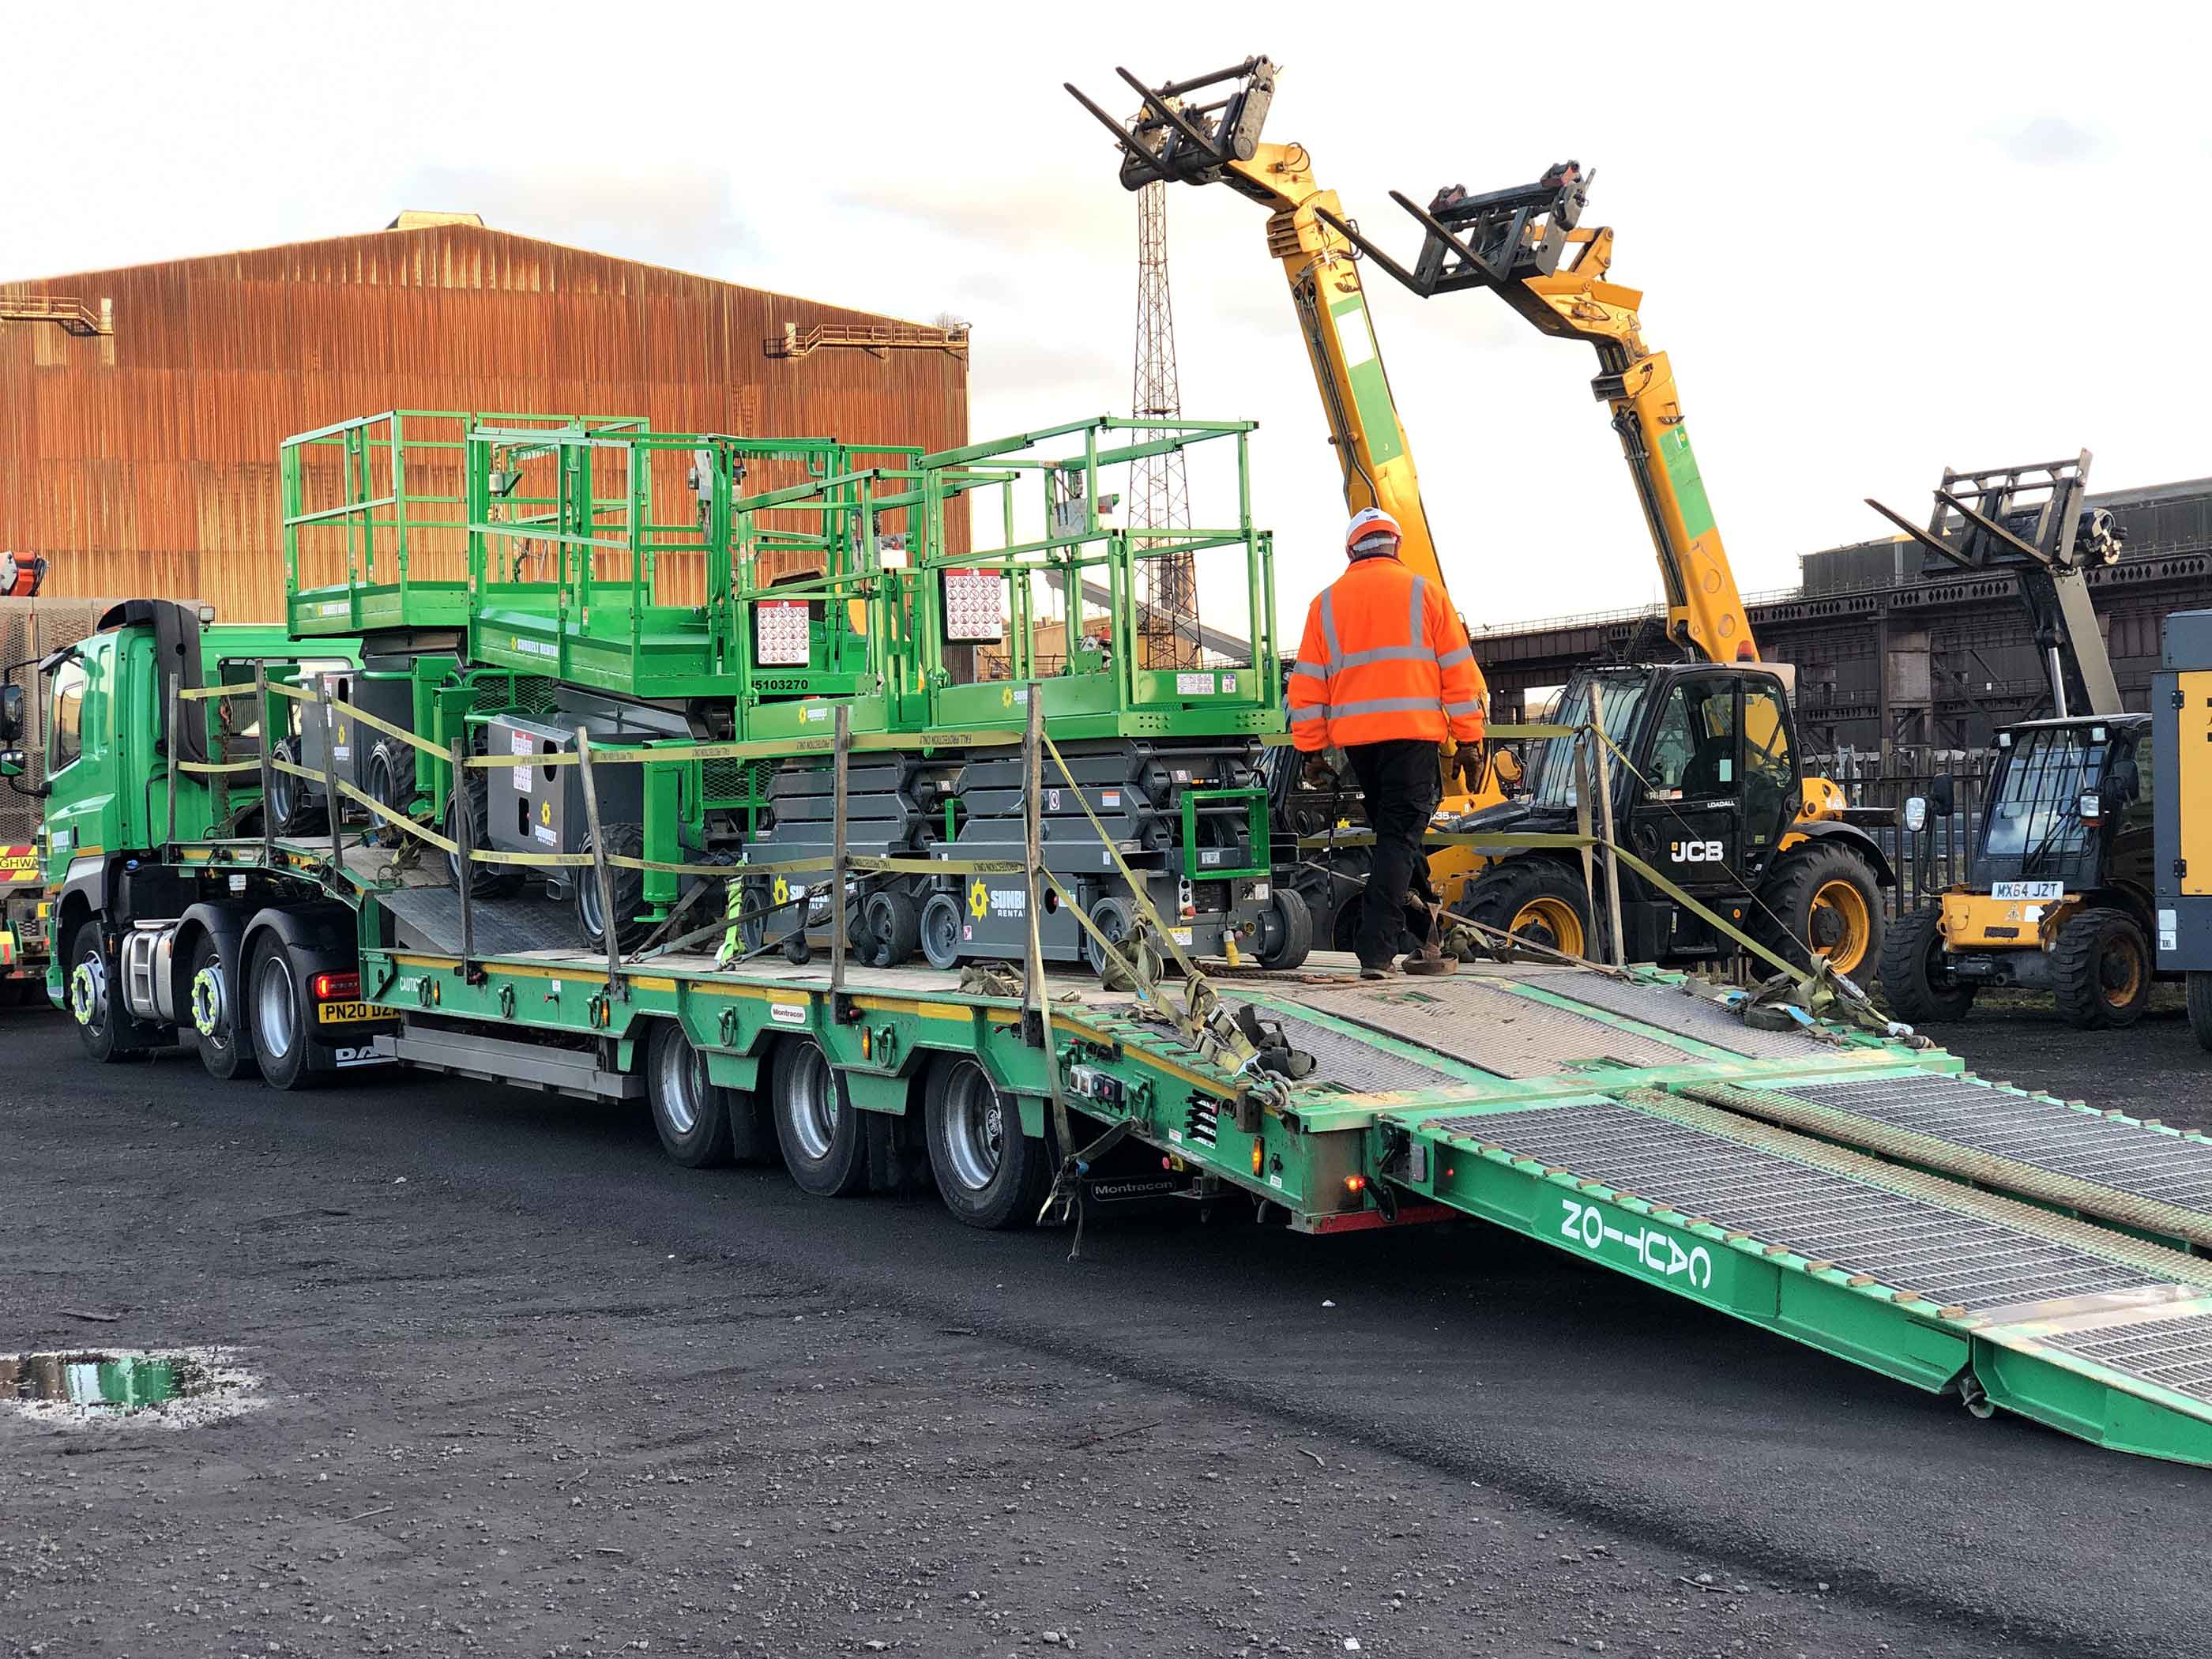 Powered Access Scissor Lifts Loaded Onto The Back Of A Flatbed